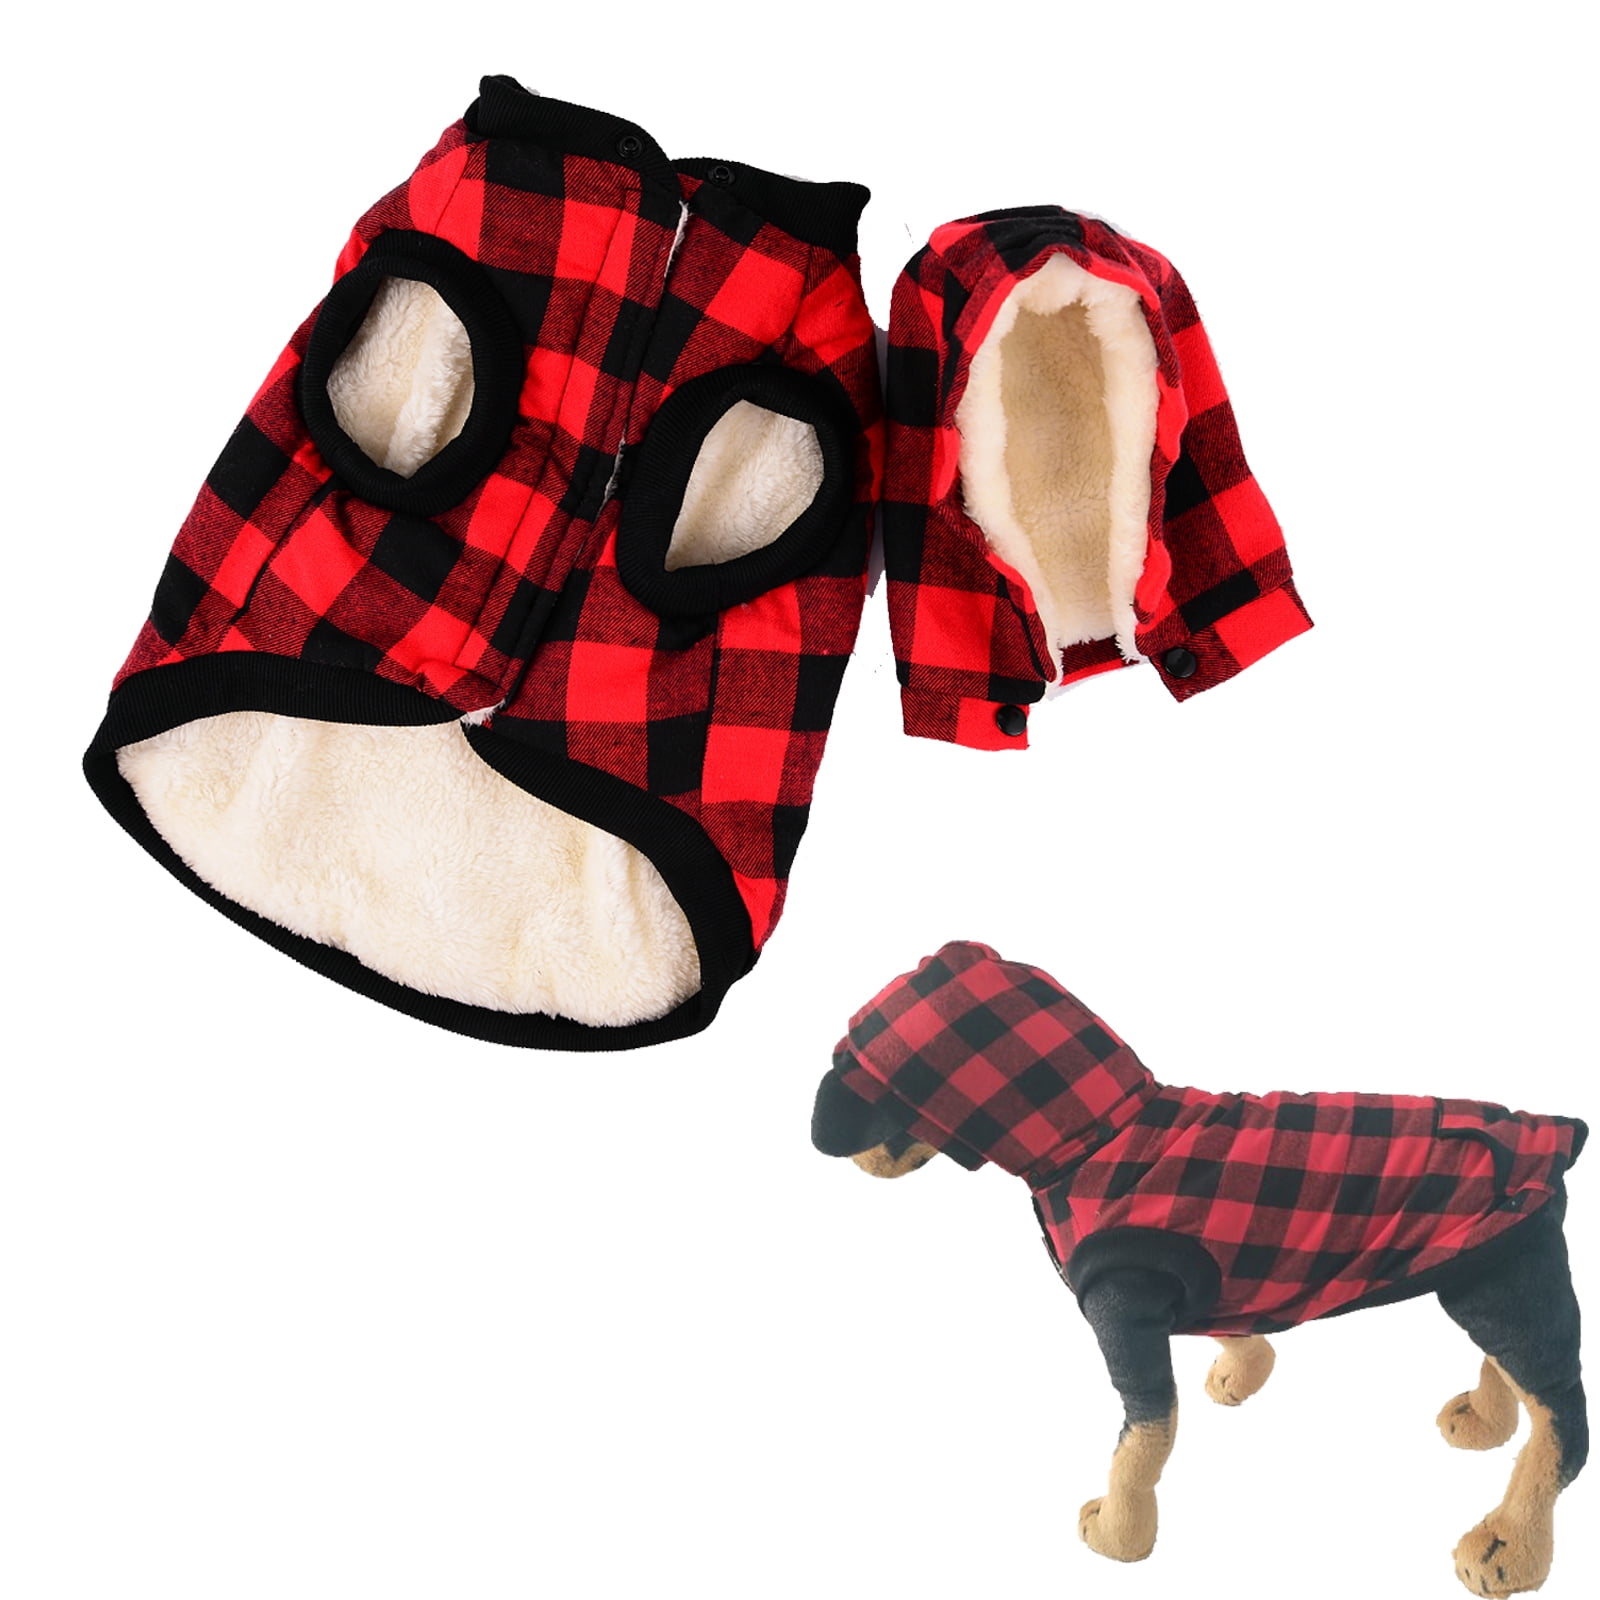 Dog Clothes in 3 Sizes Simplicity 1482 Small Medium Large Sewing Pattern 